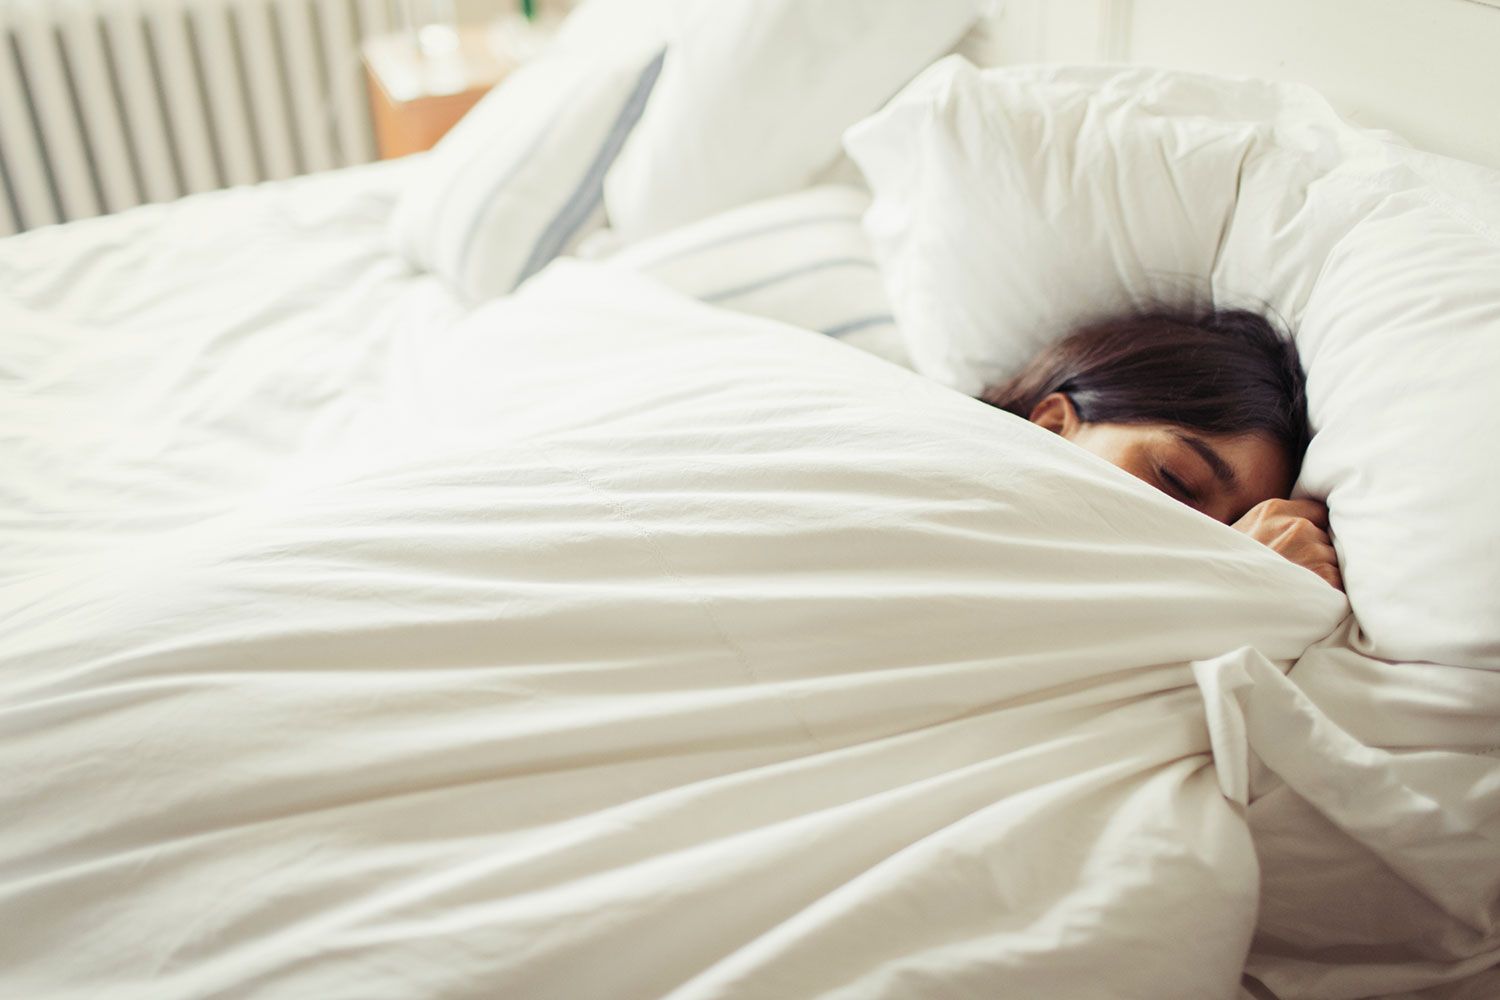 Following These 5 Sleep Tips Adds Years to Your Life, Study Finds